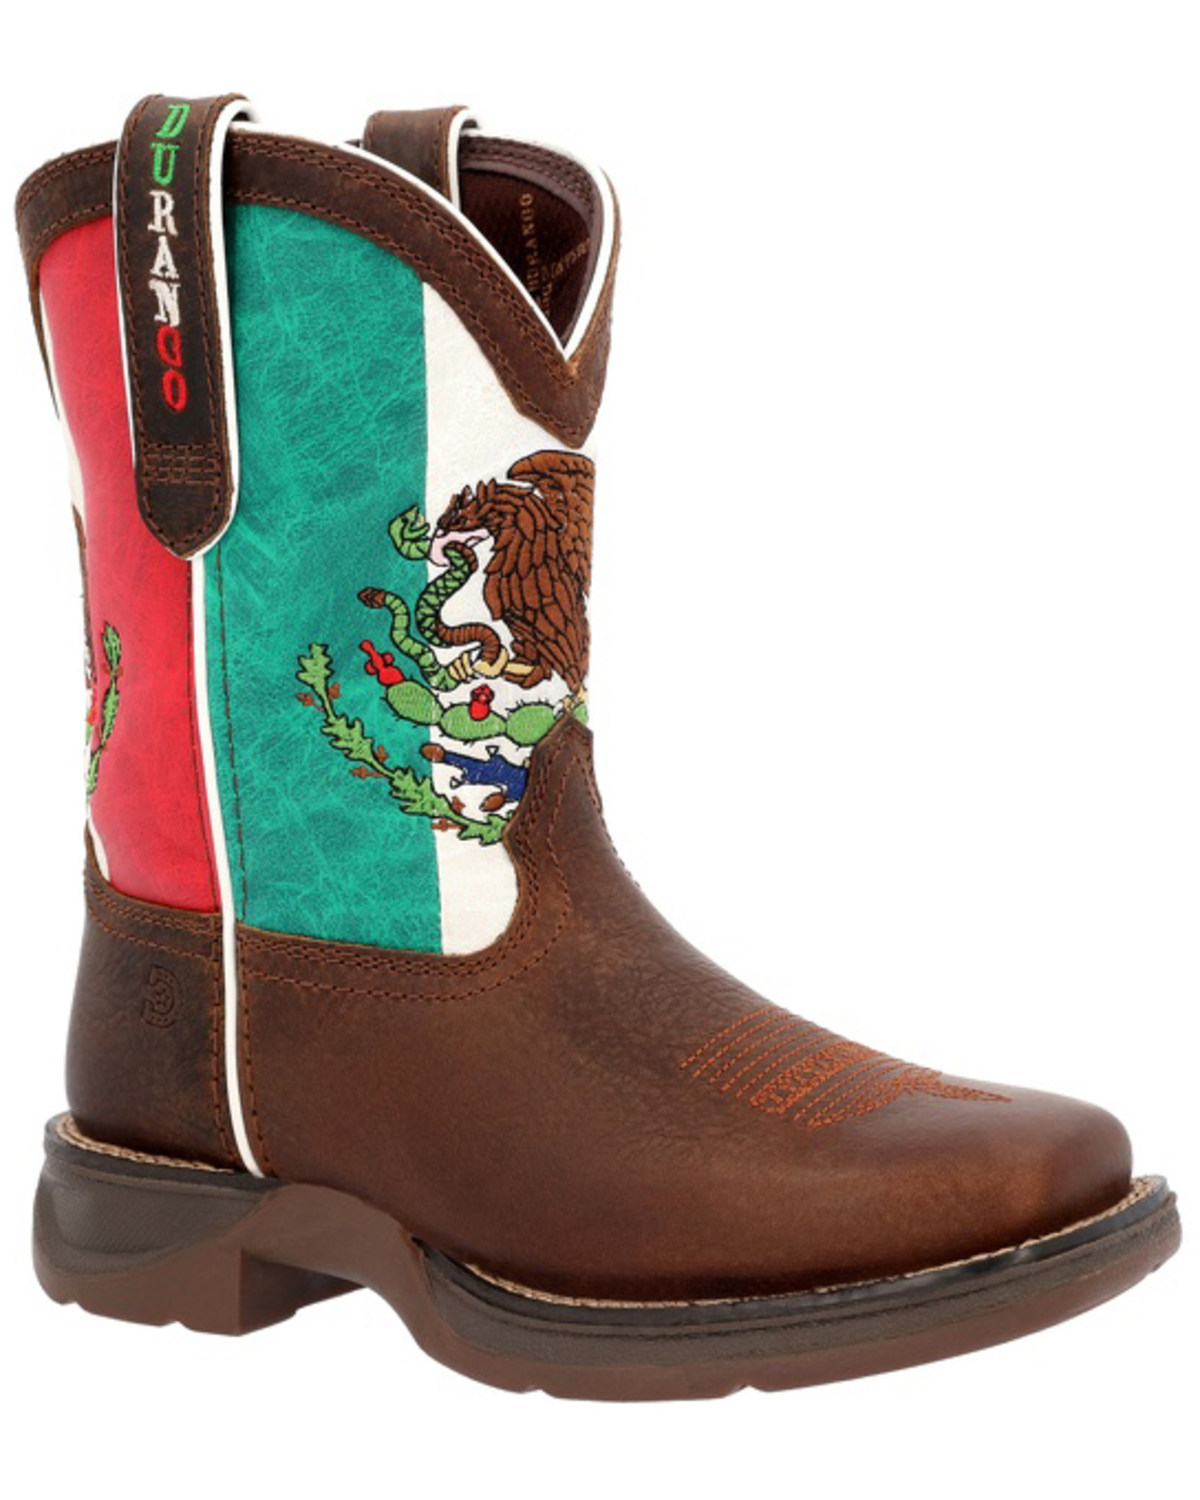 Durango Toddler Boys' Lil' Rebel Mexican Flag Western Boots - Broad Square Toe